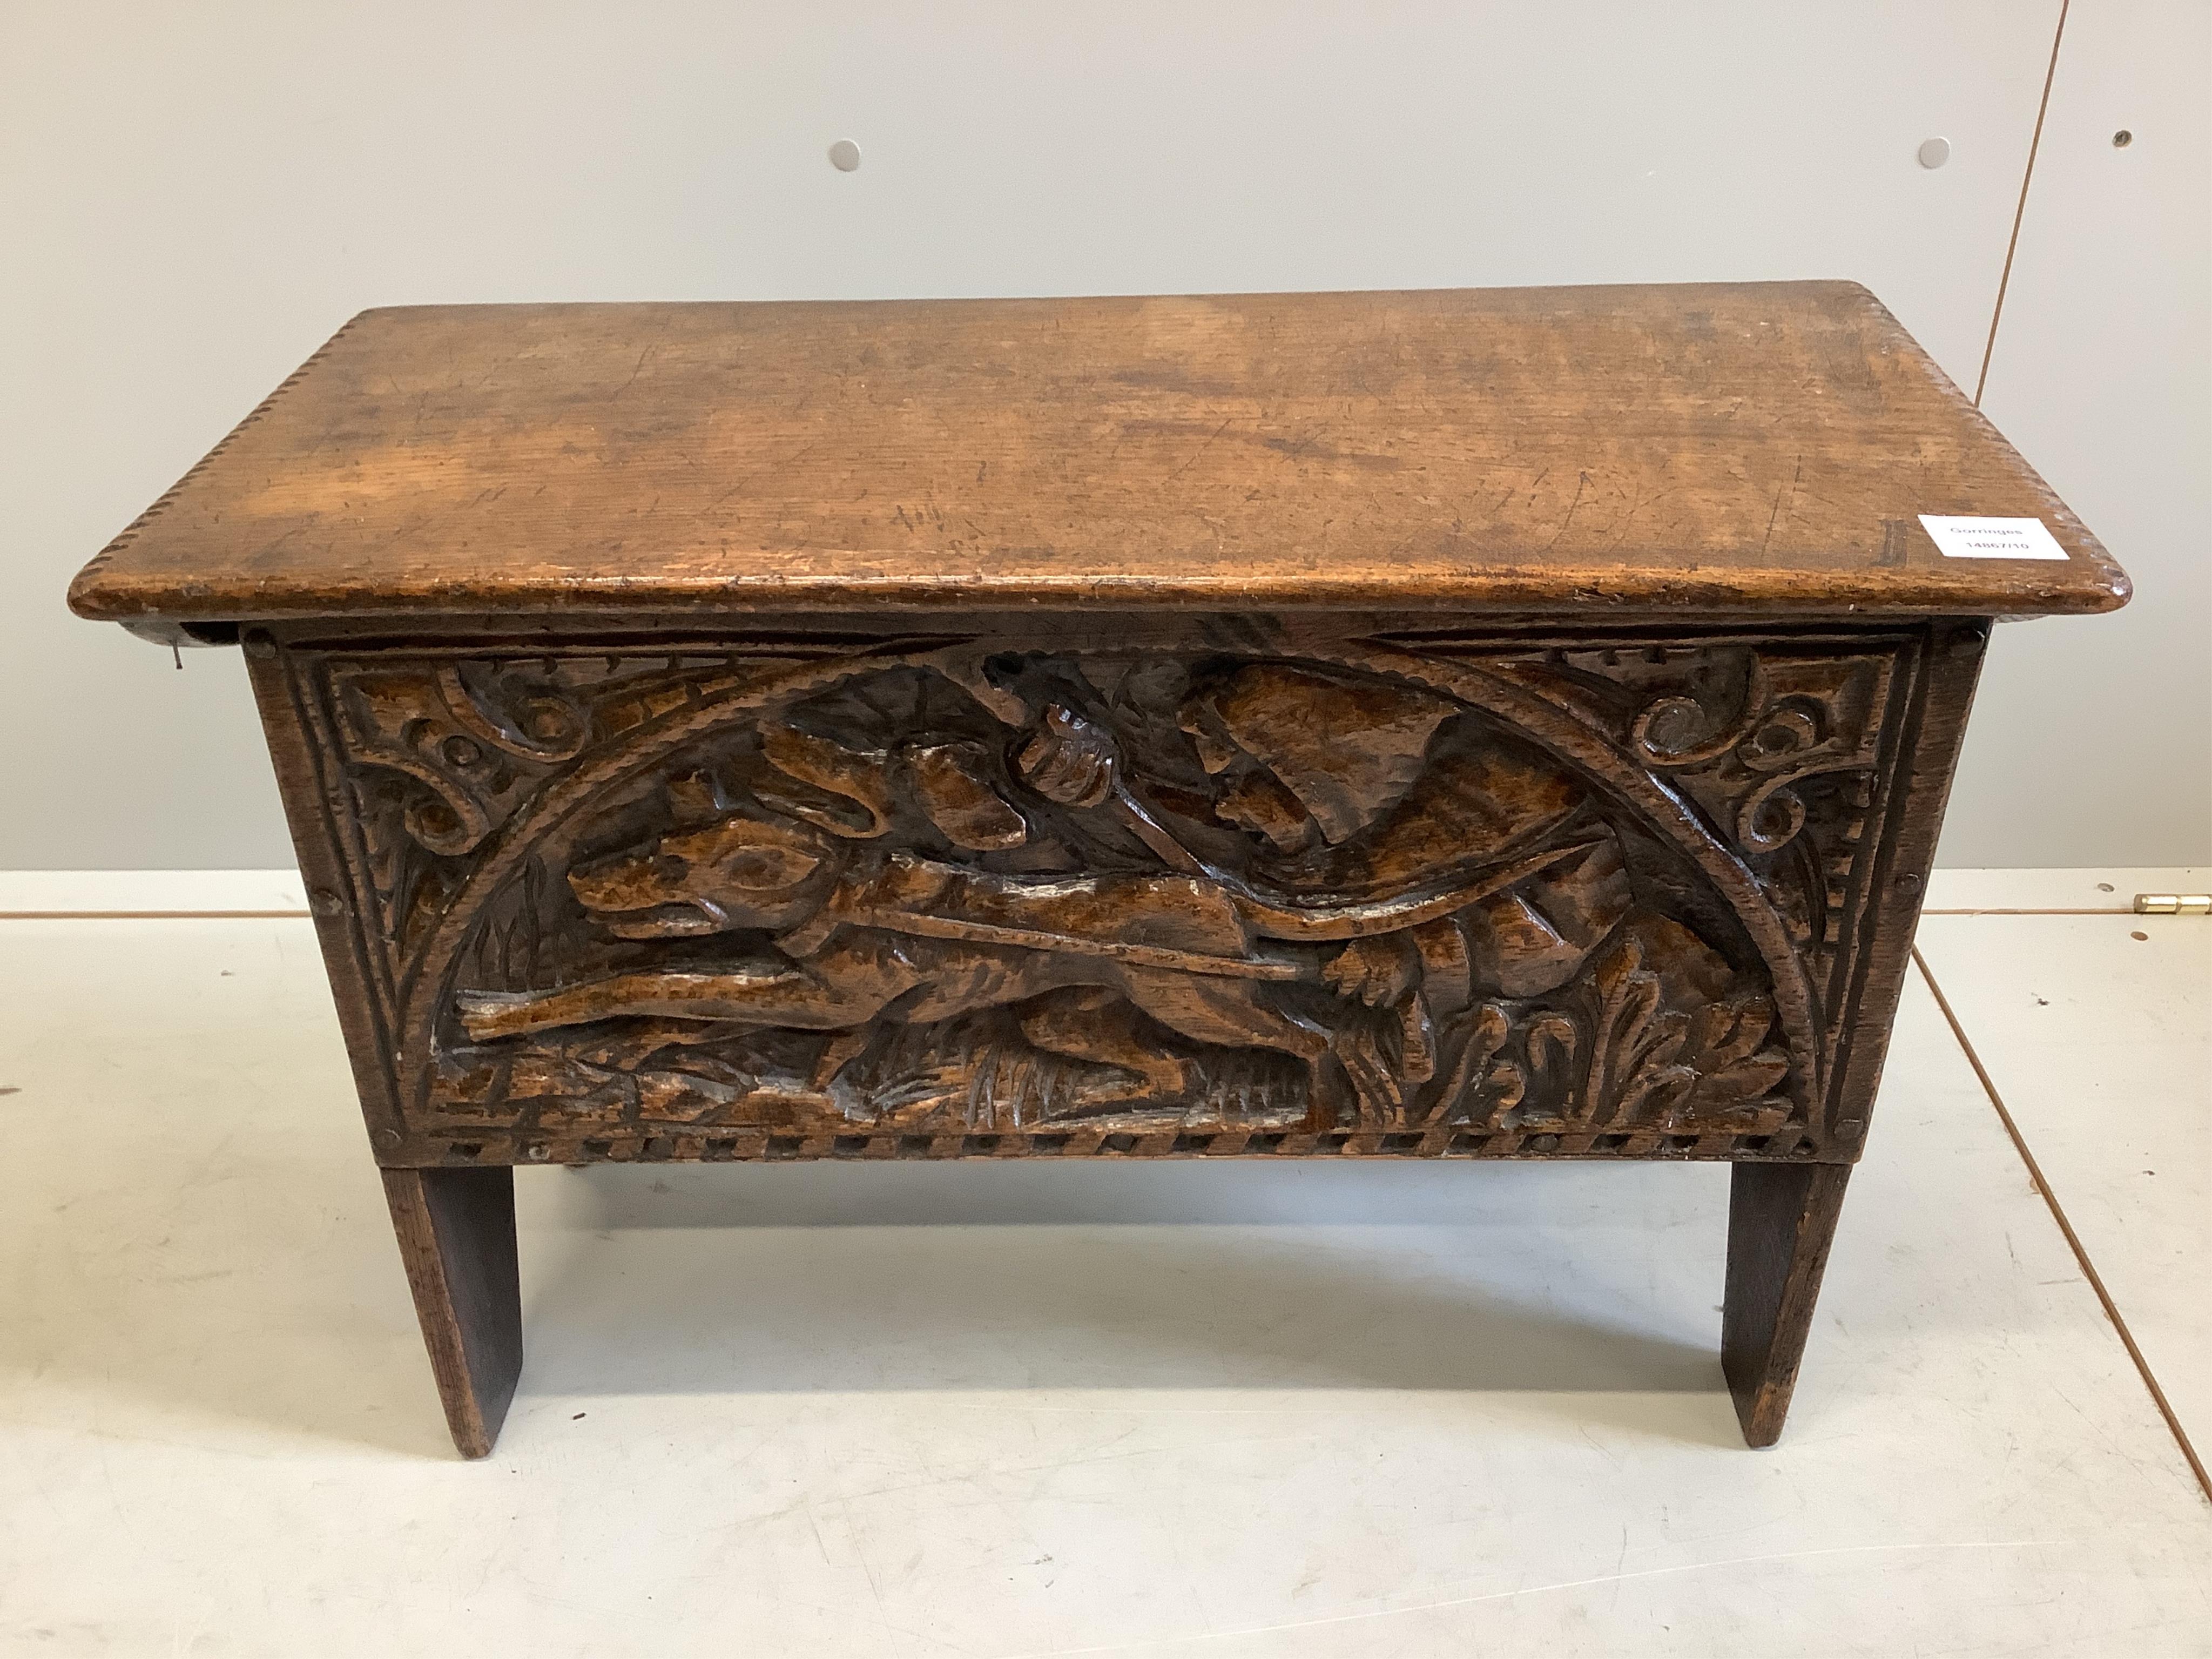 A small reproduction Tudor style oak coffer, the front carved with hunting hounds and foliage, width 67cm, depth 30cm, height 45cm. Condition - good